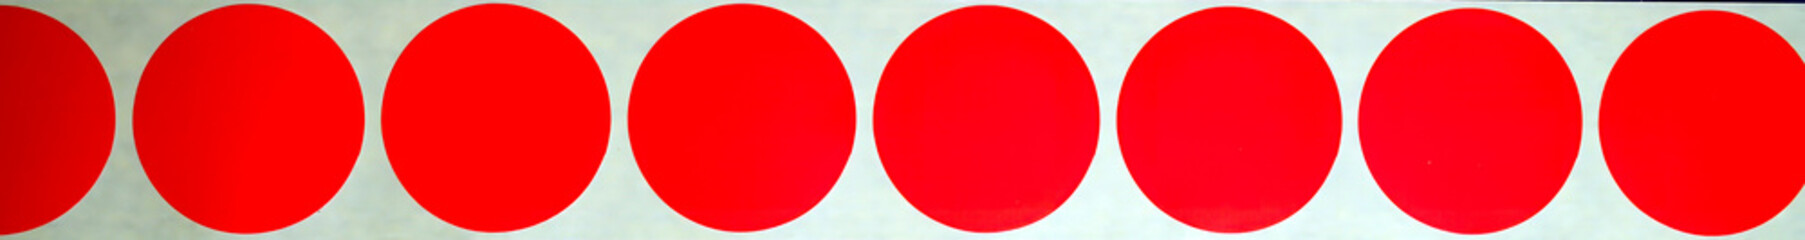 Red Coloured Round Stickers. Blank red round adhesive paper sticker label set collection isolated